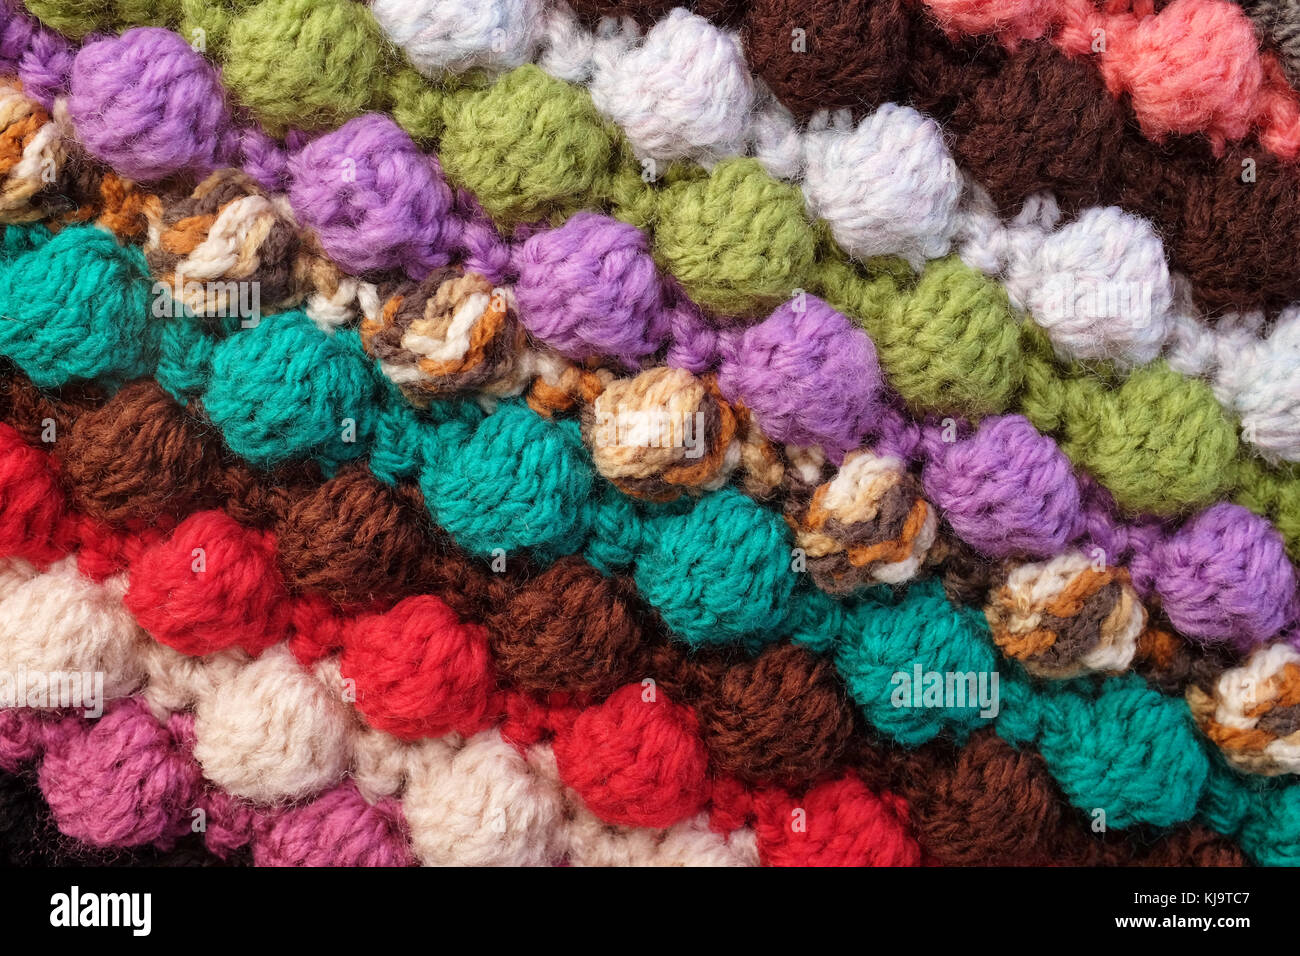 Multi-coloured crochet bobble stitches in diagonal stripes, soft yarn abstract background texture Stock Photo